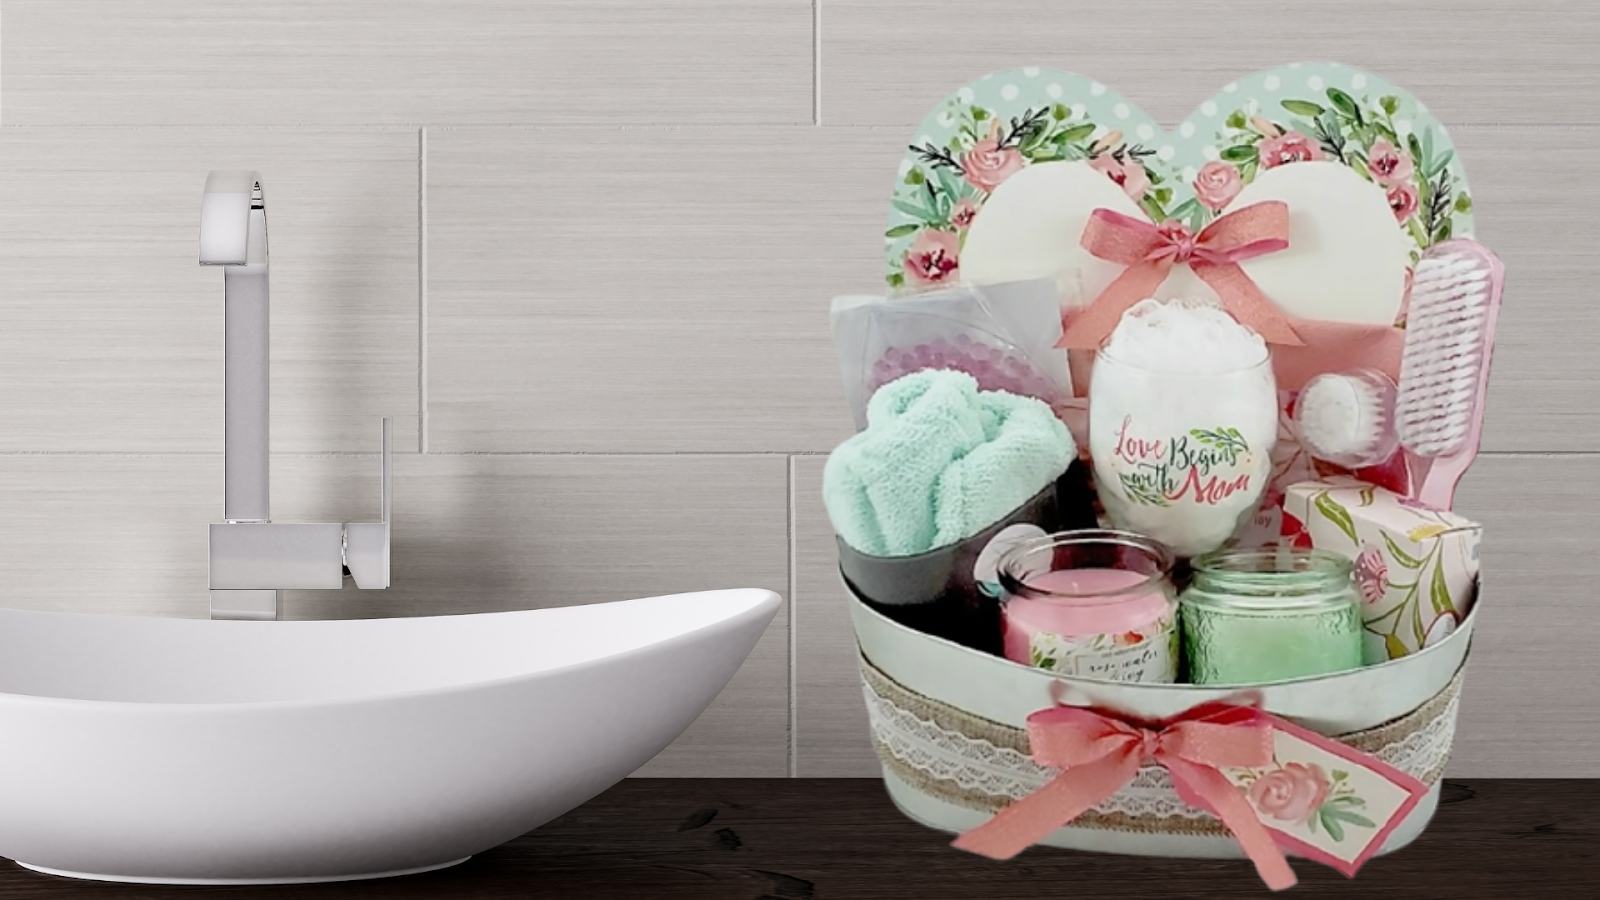 spa-themed gift basket for lounging in the tub 